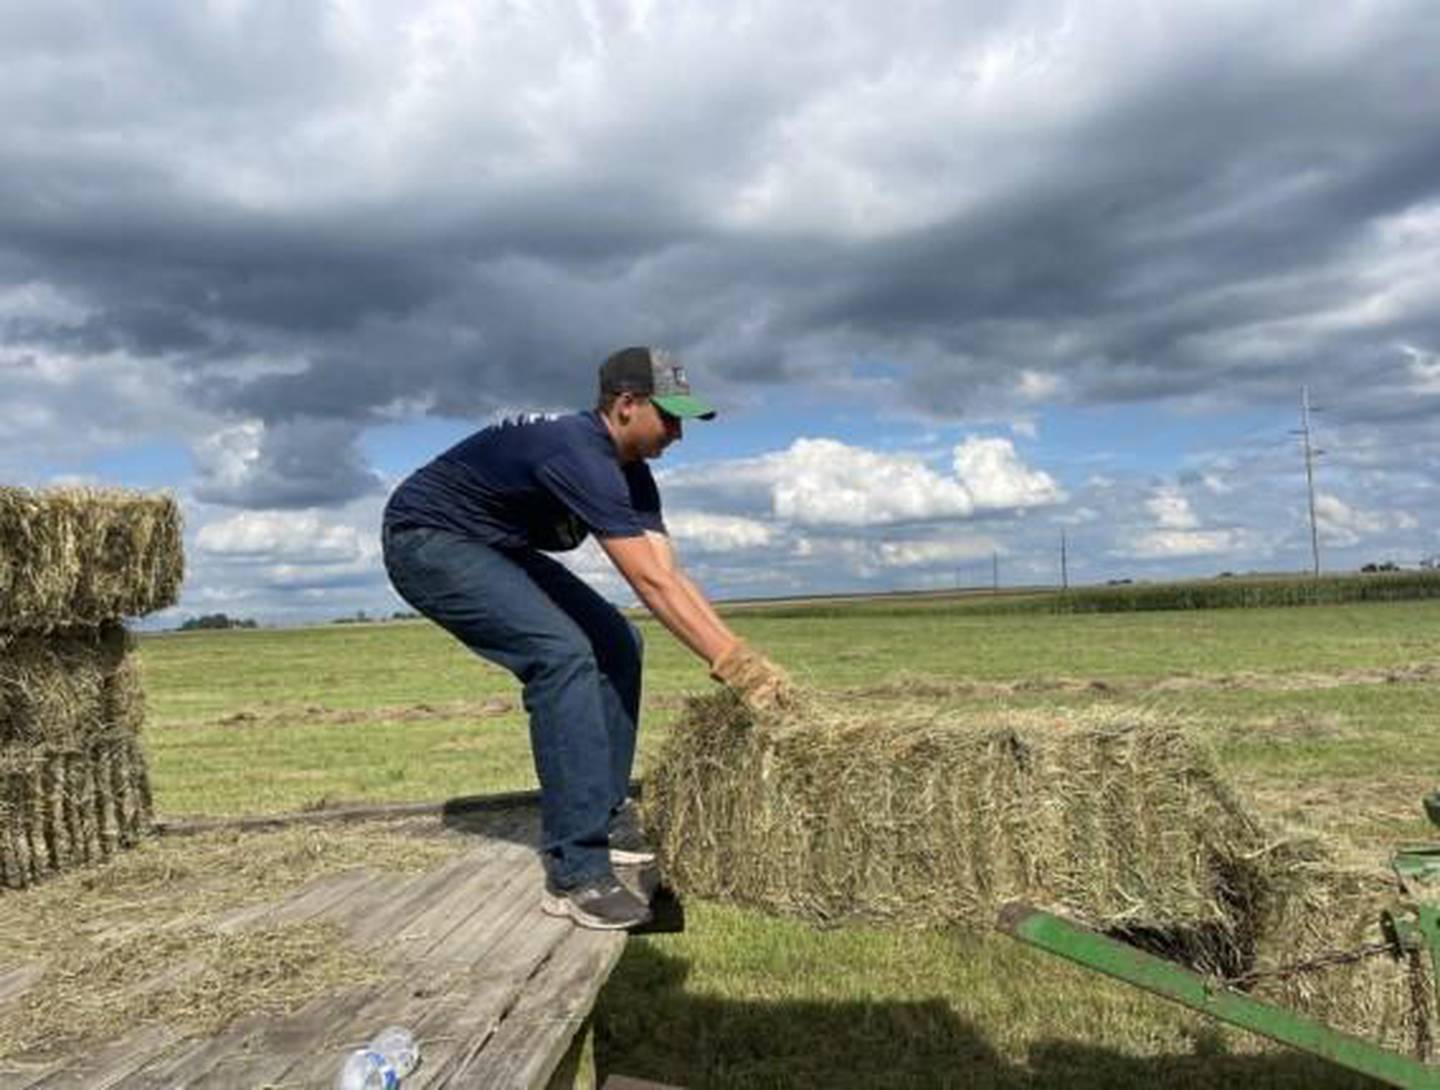 William LaFary stacks a hay bale on the rack for his hay business that he owns and operates as part of his FFA project.